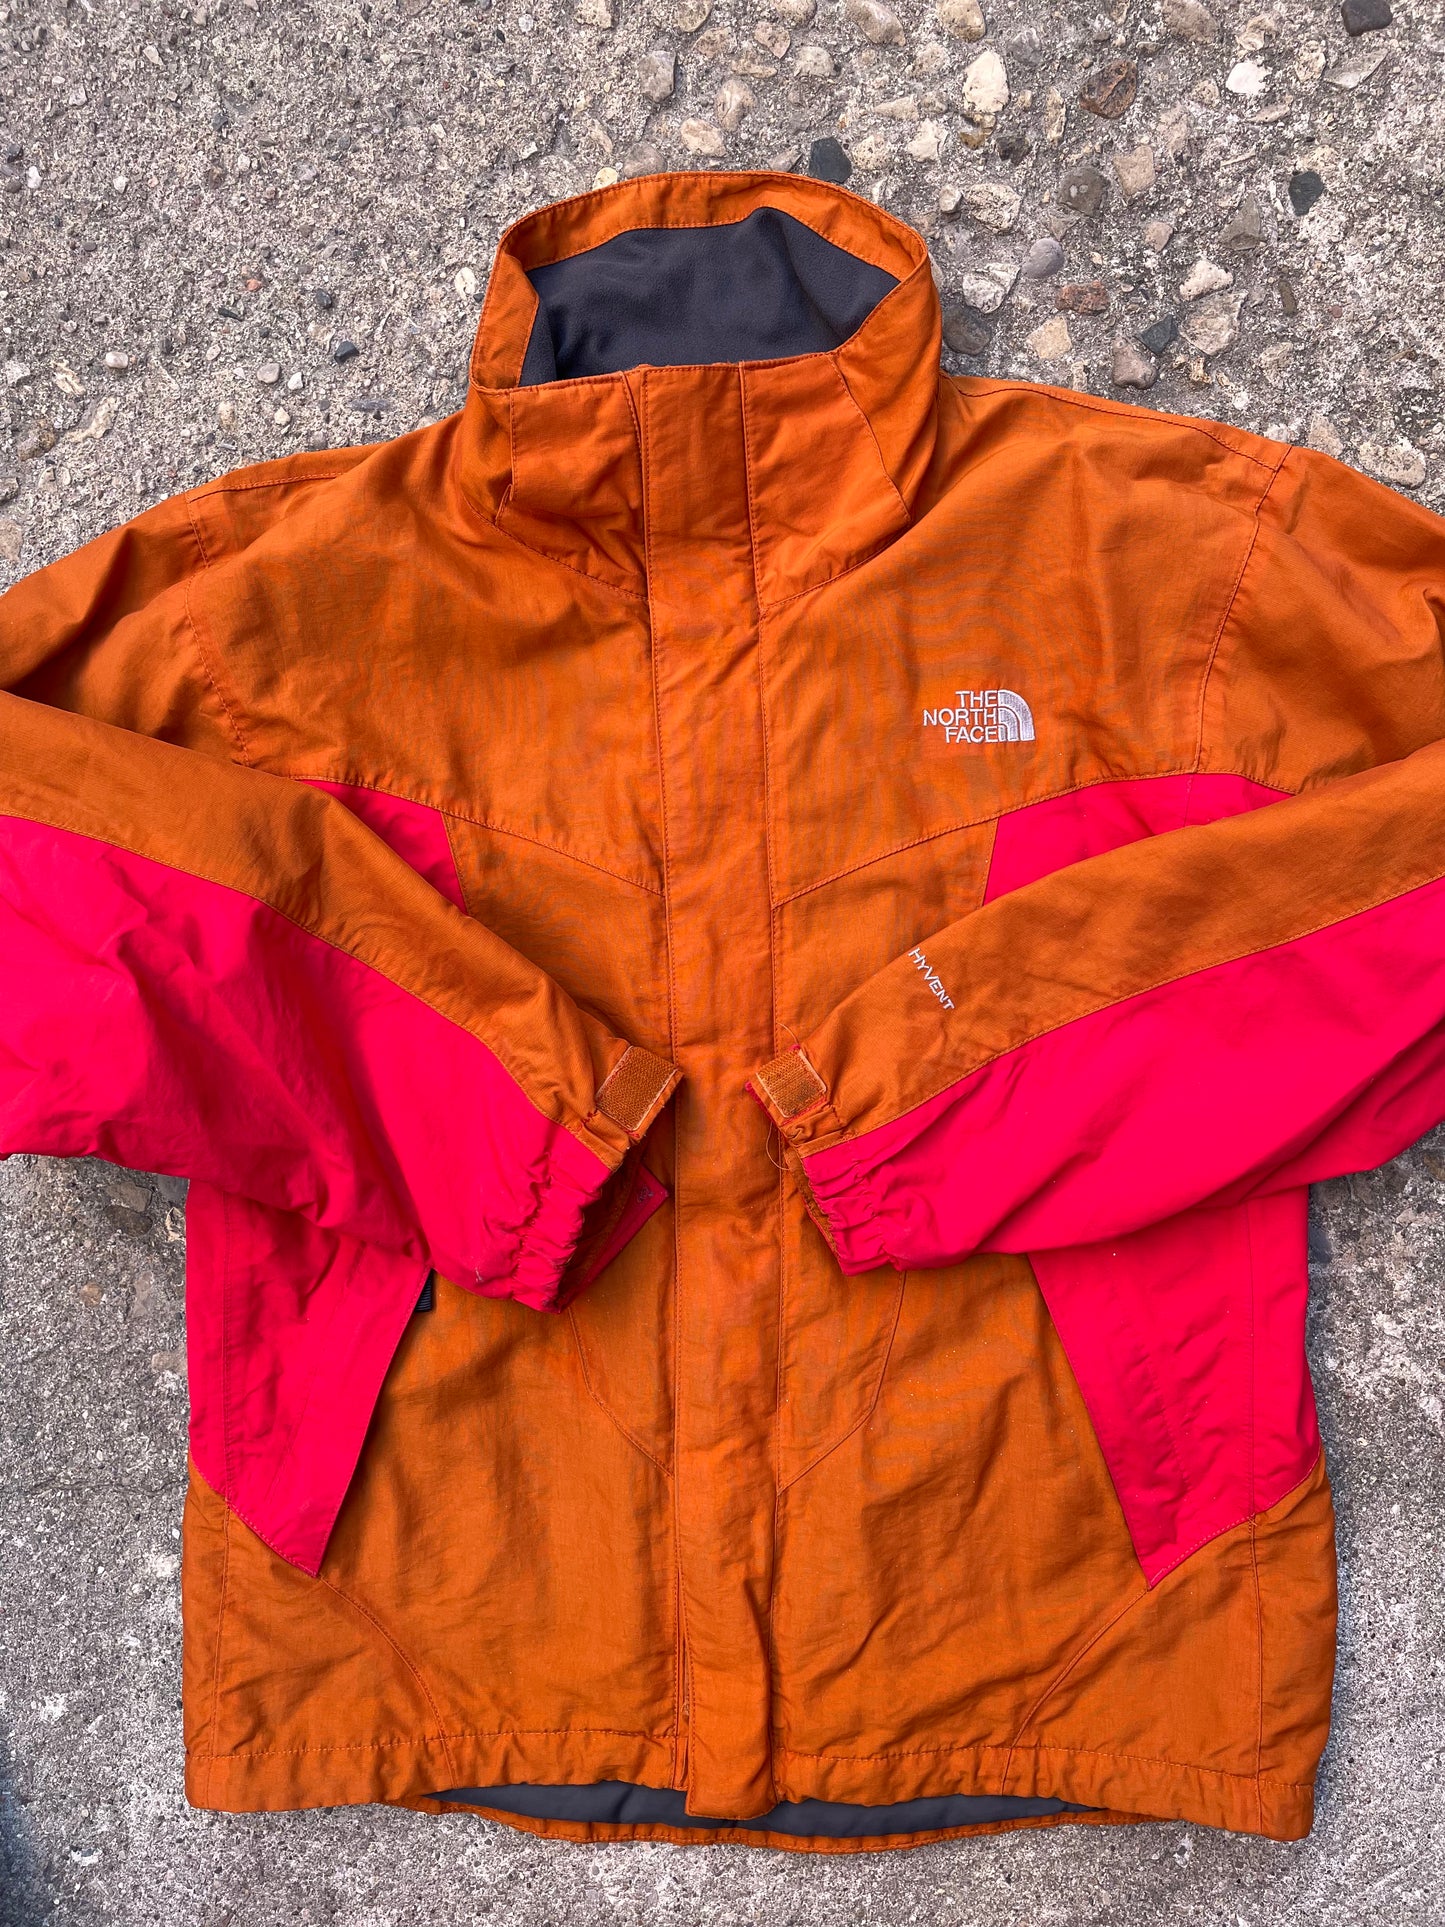 2000's The North Face Hyvent Shell Light Jacket - M